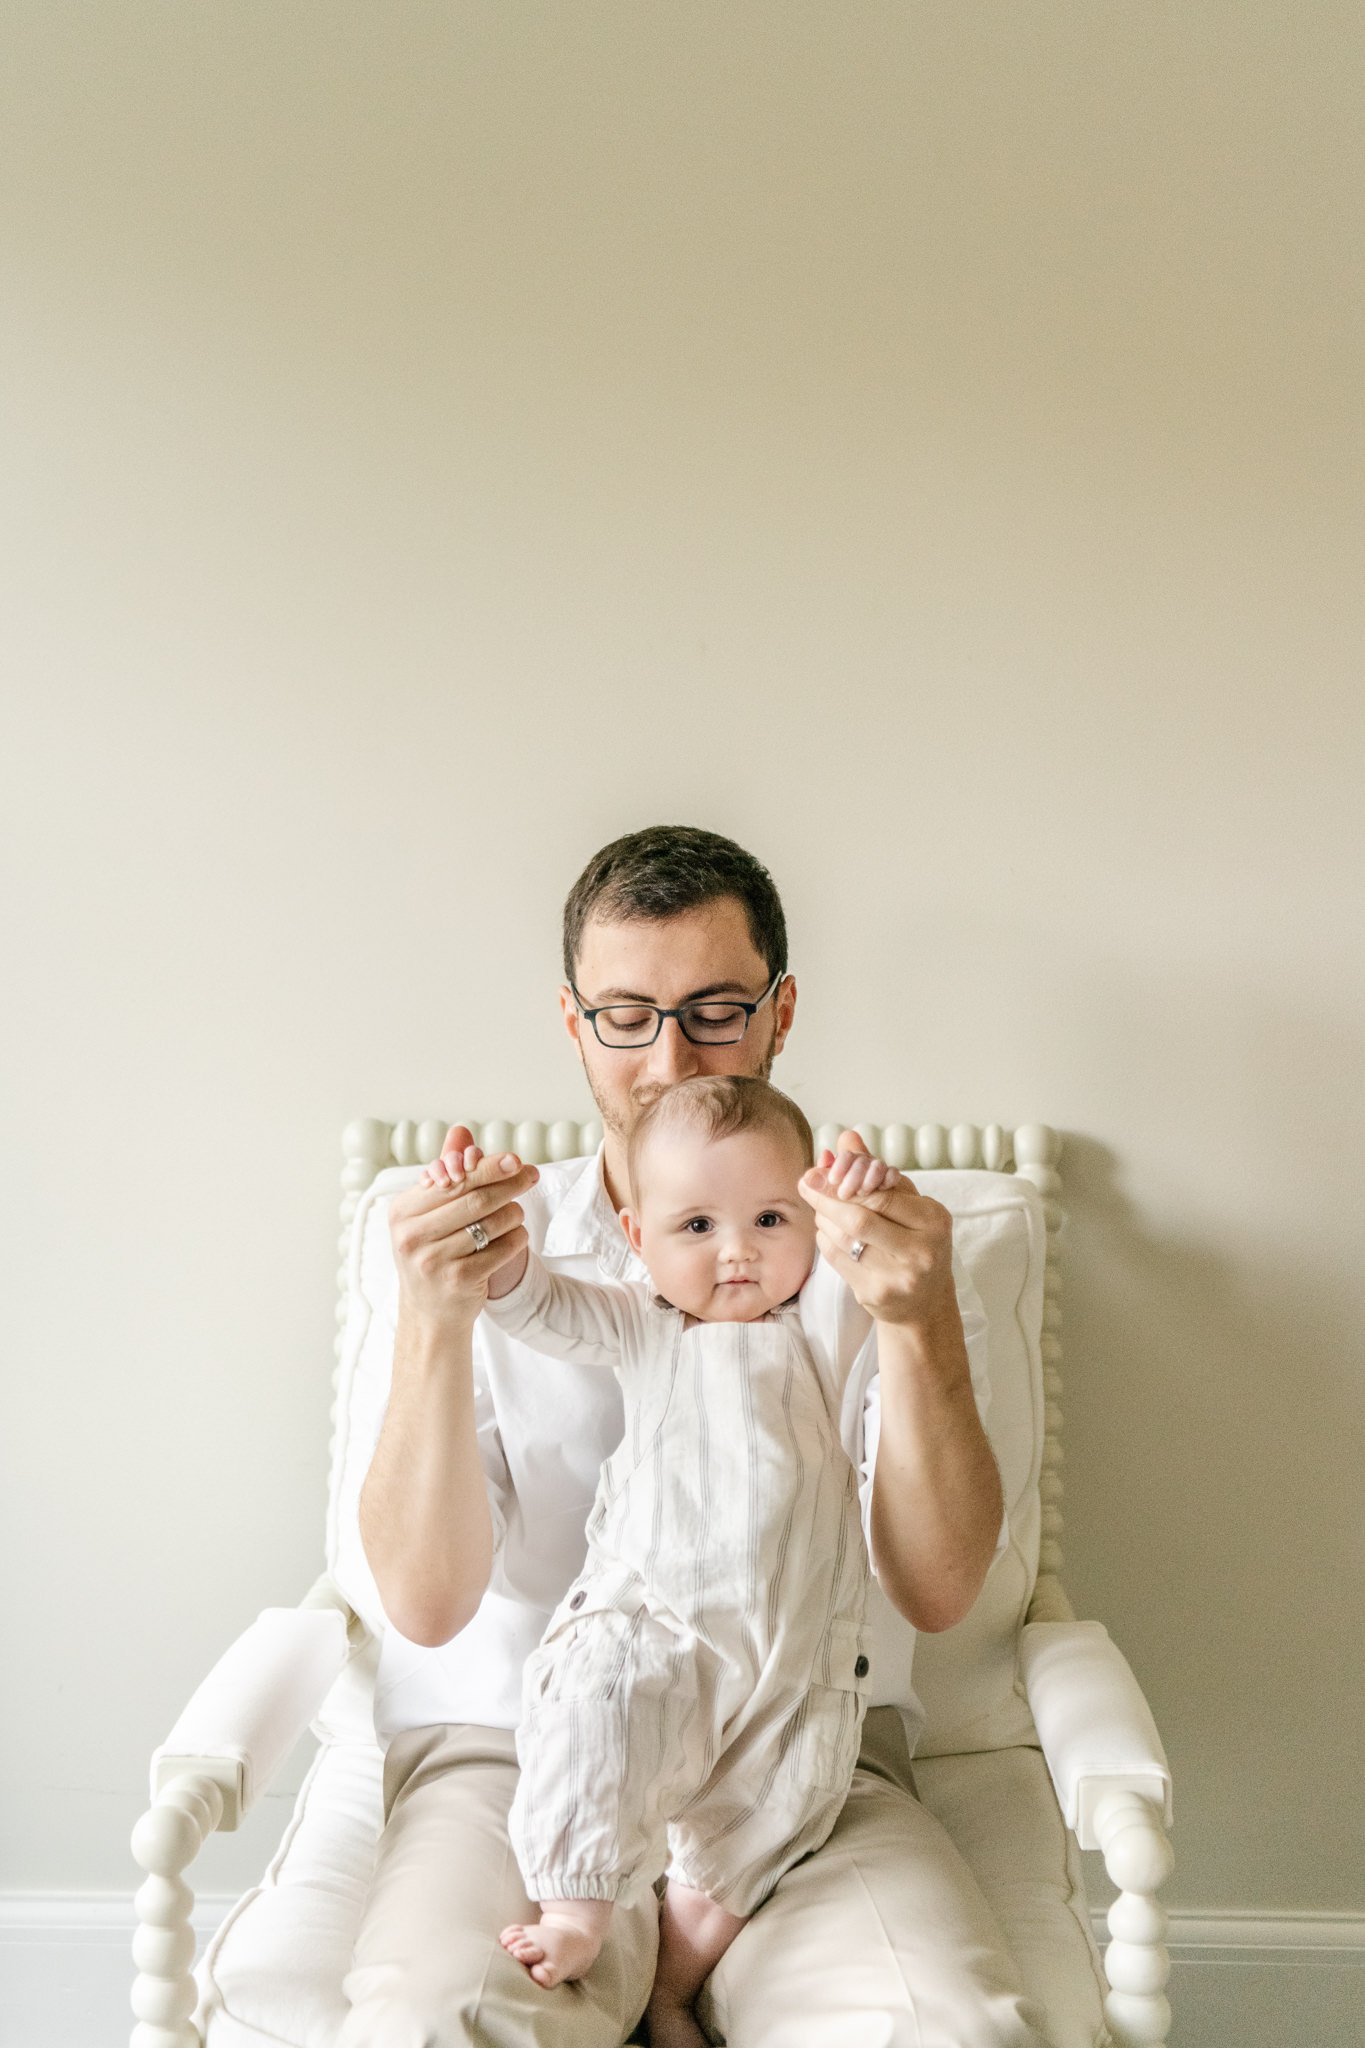  A daddy-daughter portrait captured at a home in South Orange, NJ by Nicole Hawkins Photography. baby girl sitting with dad NJ family portraits #NicoleHawkinsPhotography #NicoleHawkinsfamilies #AtHomePortraits #EastCoastFamilyPhotographer #NewJerseyI